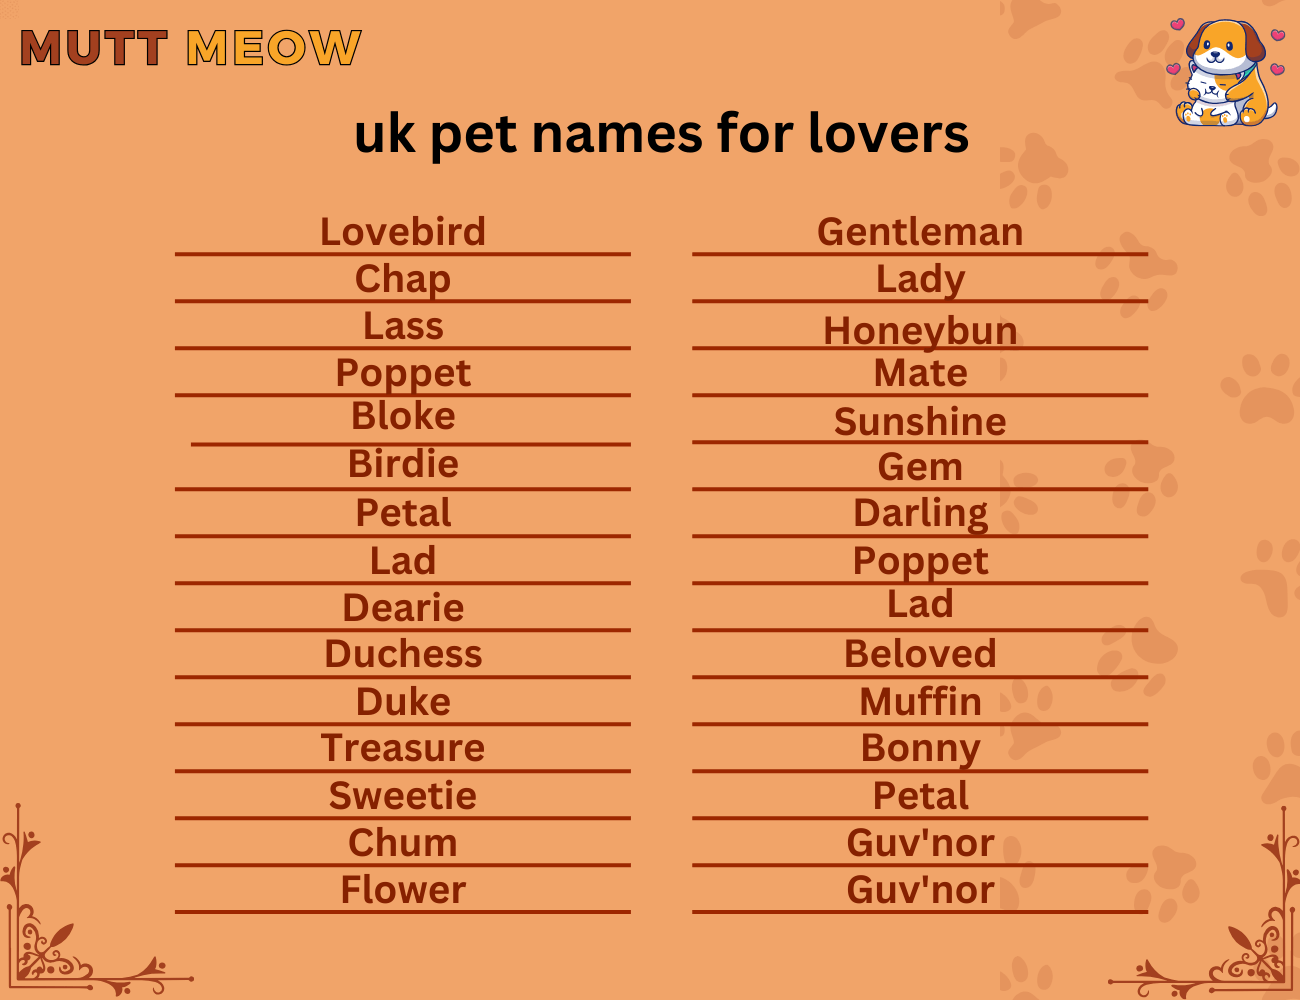 uk pet names for lovers